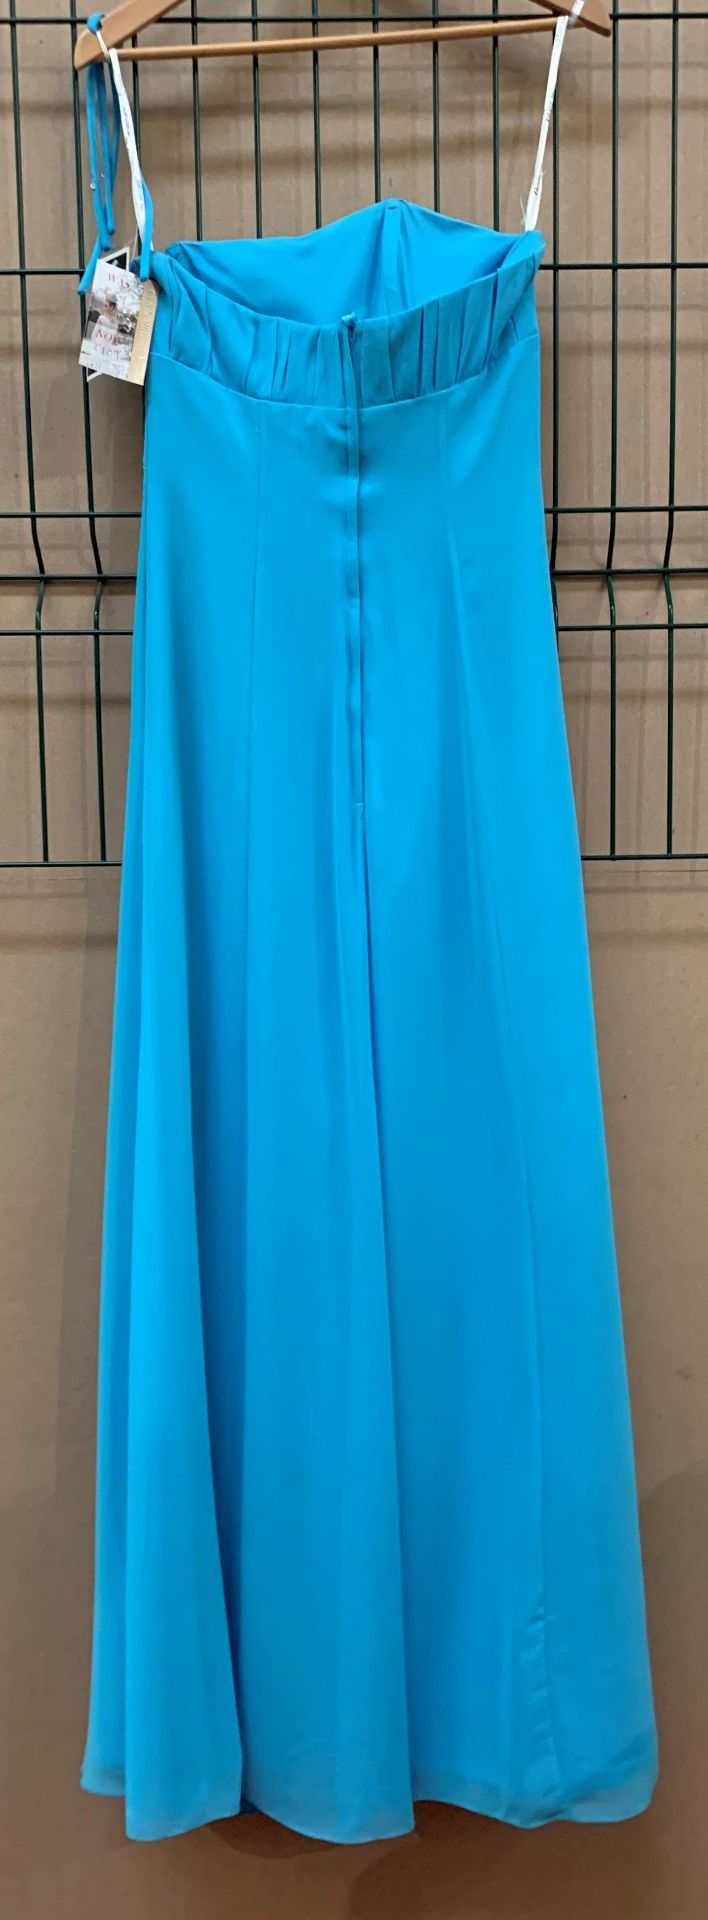 A bridesmaid/prom dress by Alexia Designs, model 4002, turquoise, size 8, - Image 2 of 2